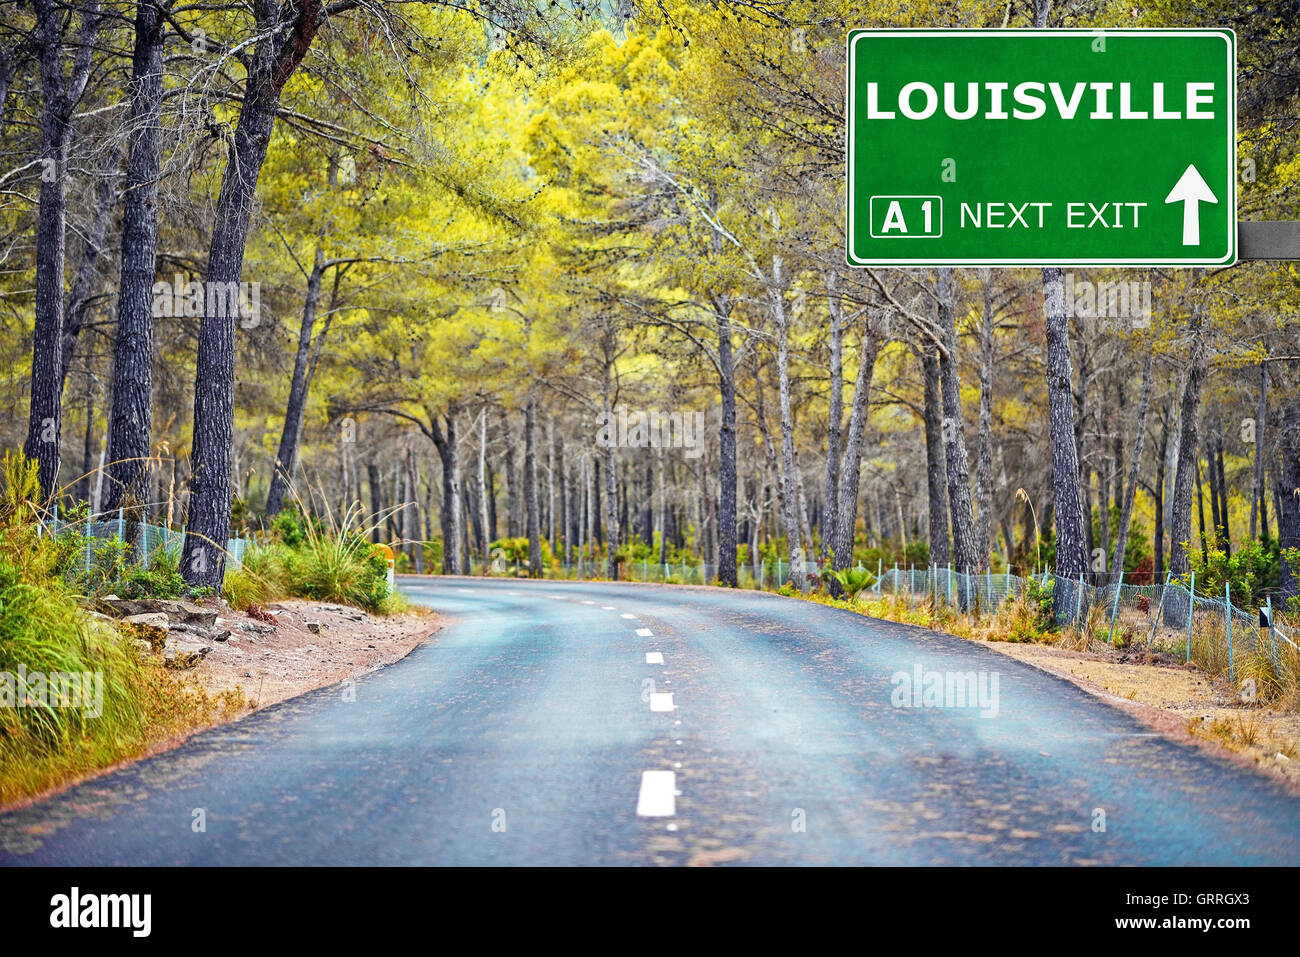 Welcome To Louisville Green Road Sign Stock Photo, Picture and Royalty Free  Image. Image 55230738.